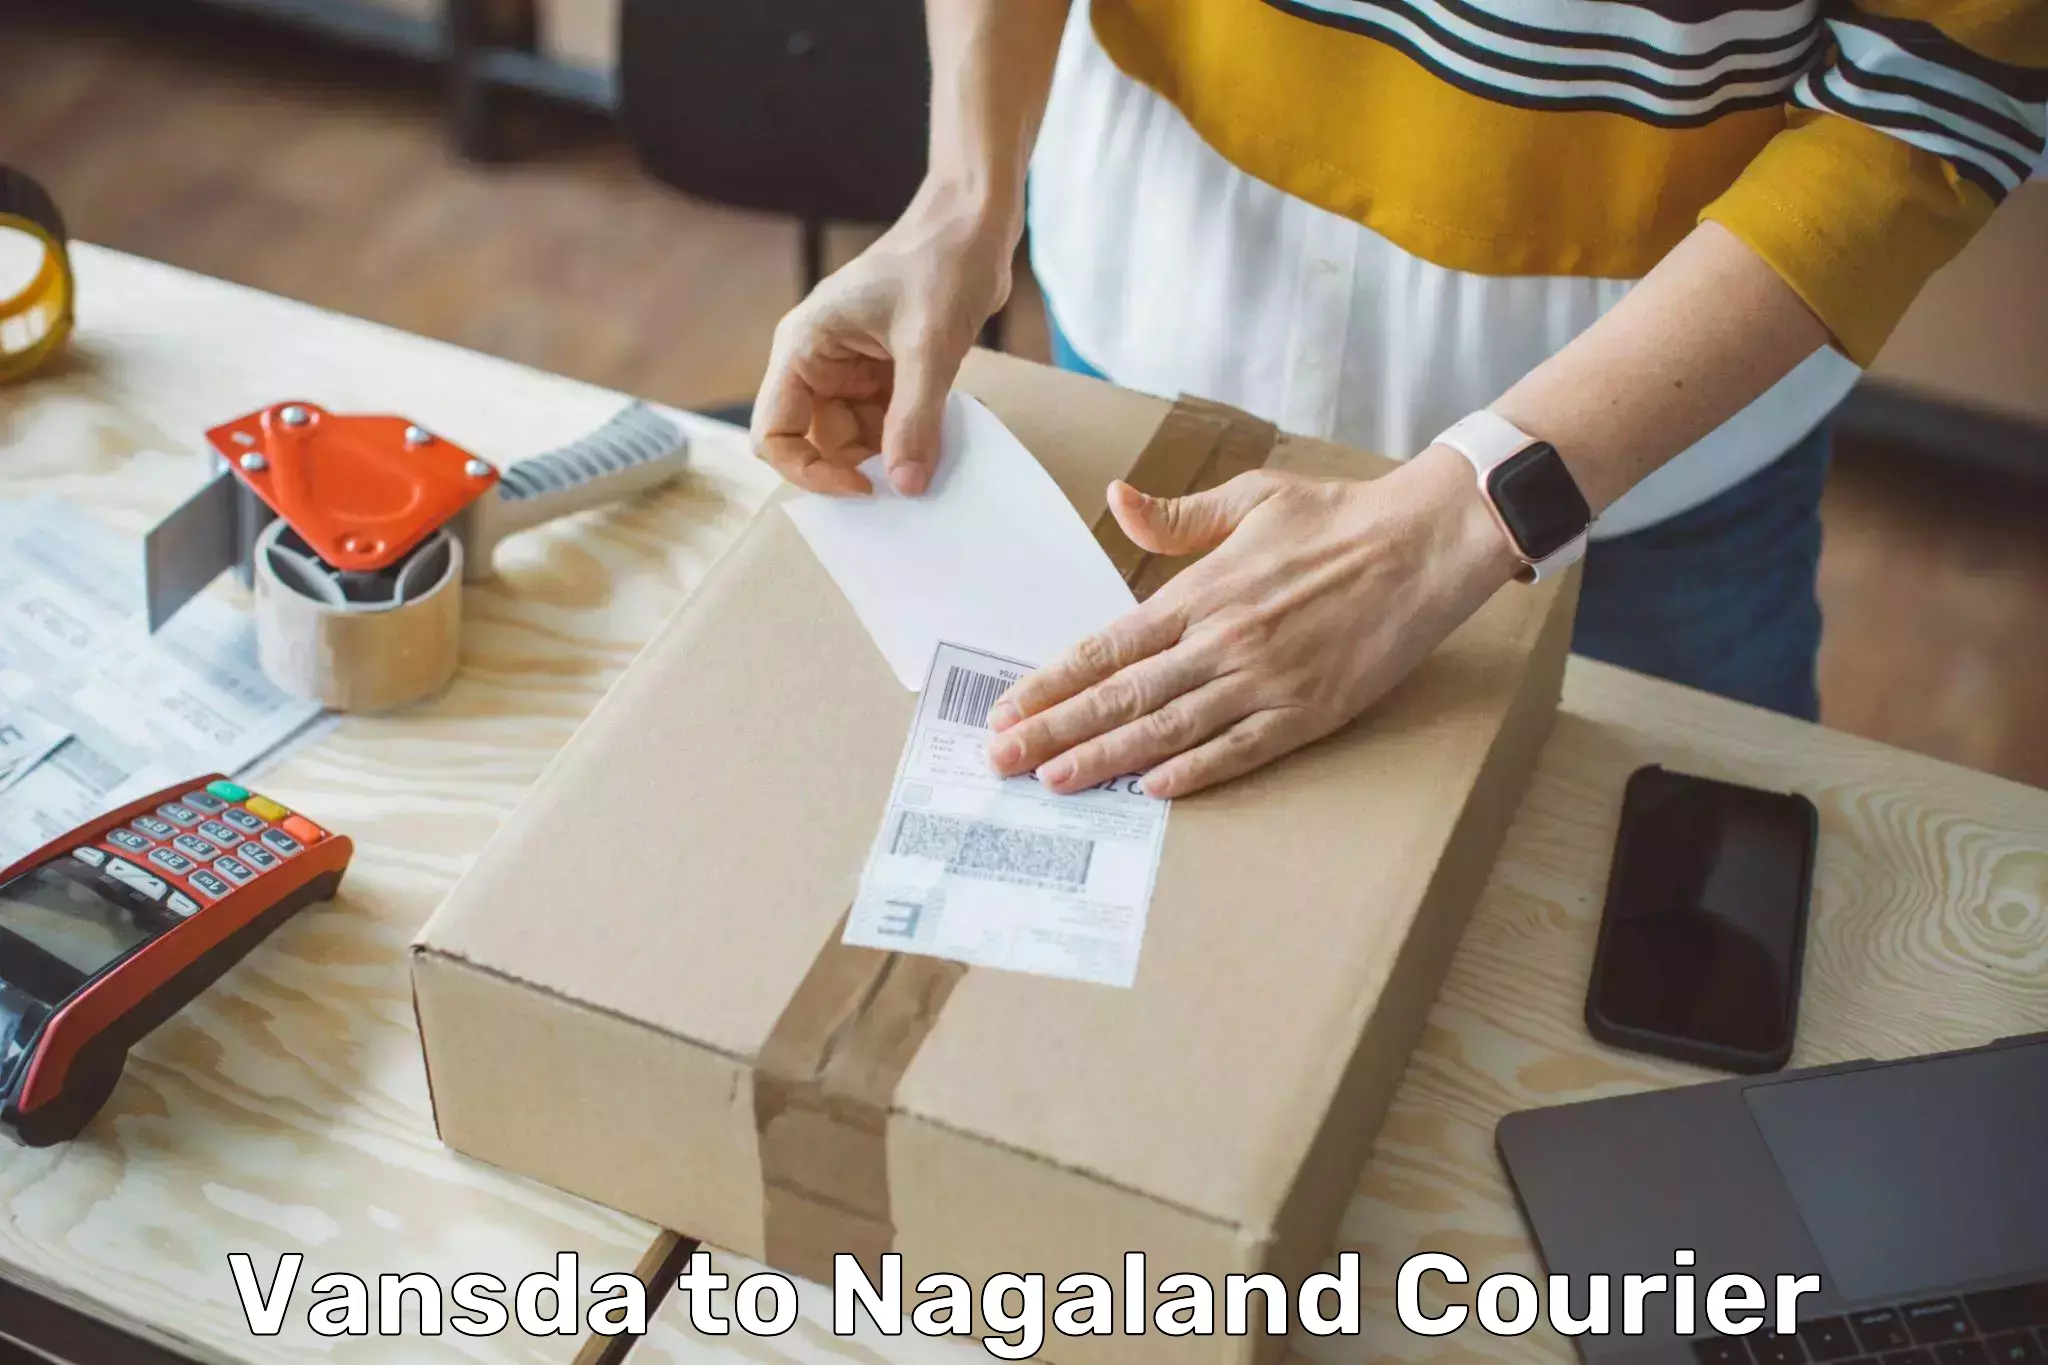 Express delivery network Vansda to Nagaland